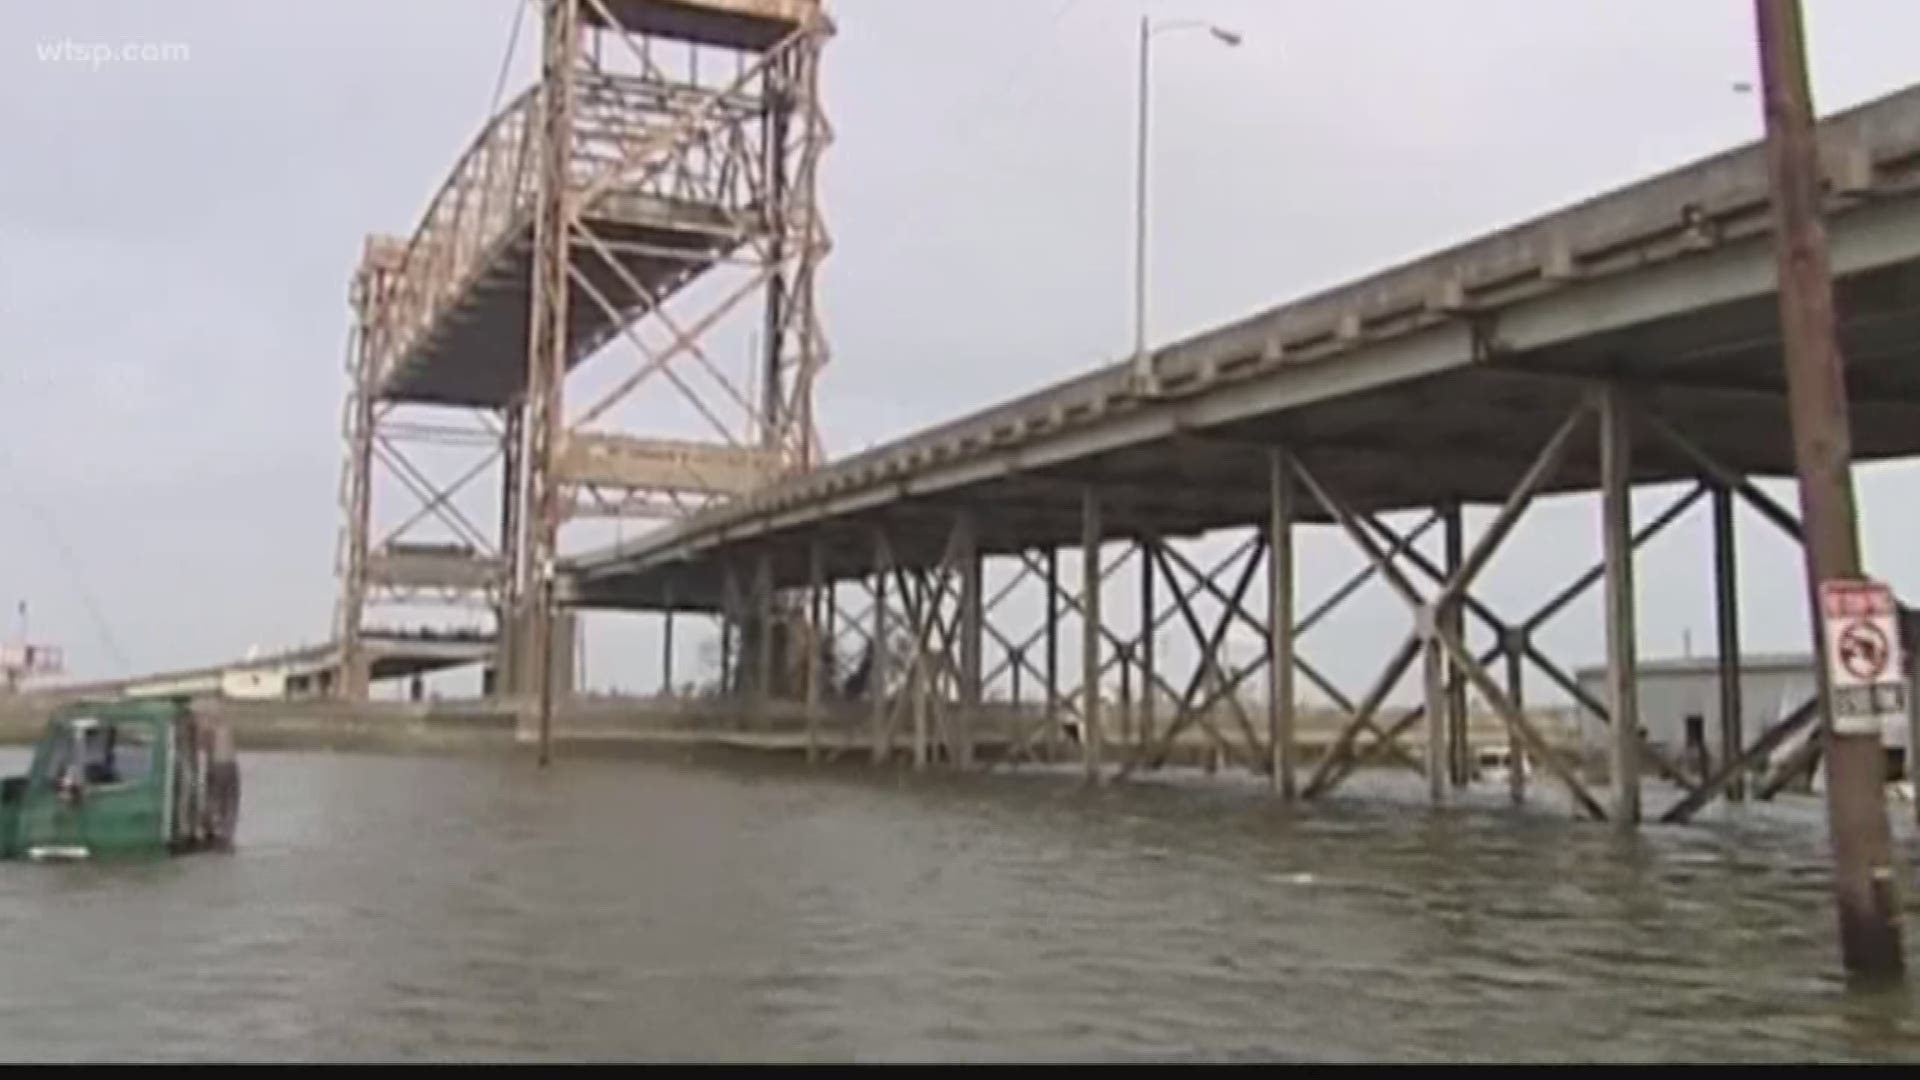 How prepared is New Orleans for Tropical Storm Barry after Hurricane Katrina hit 14 years ago?